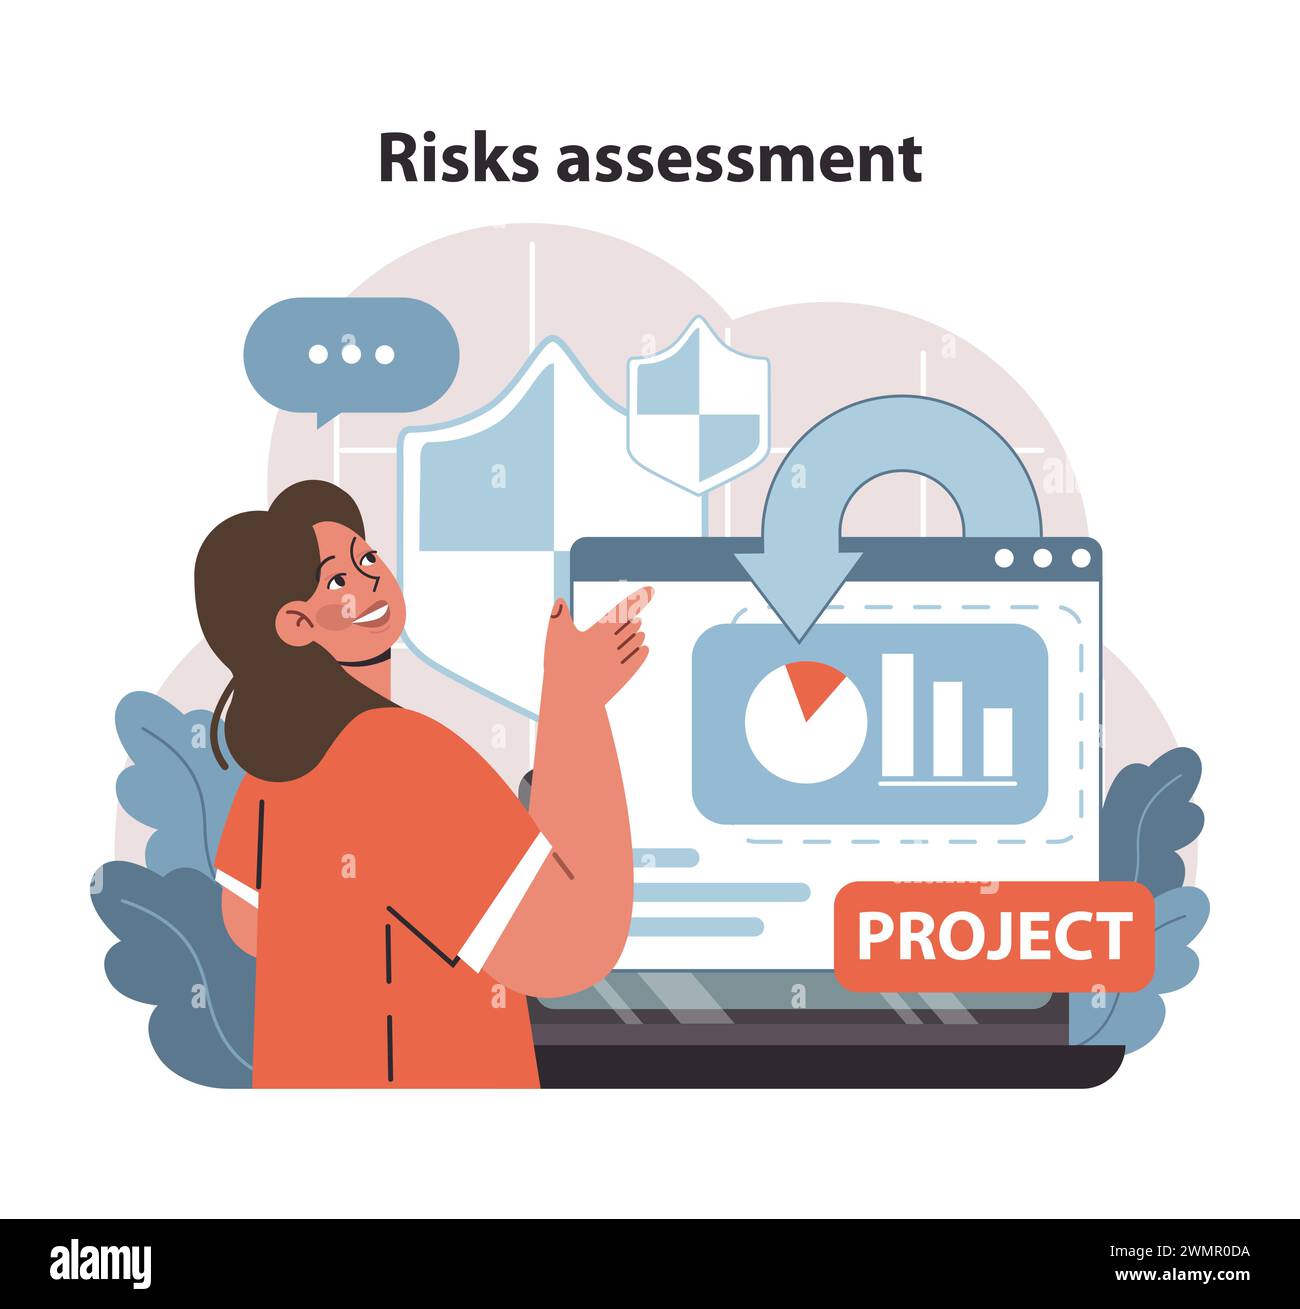 Risk Assessment in Project Management. A manager evaluates potential project hazards, ensuring preparedness and mitigation. Flat vector illustration. Stock Vector